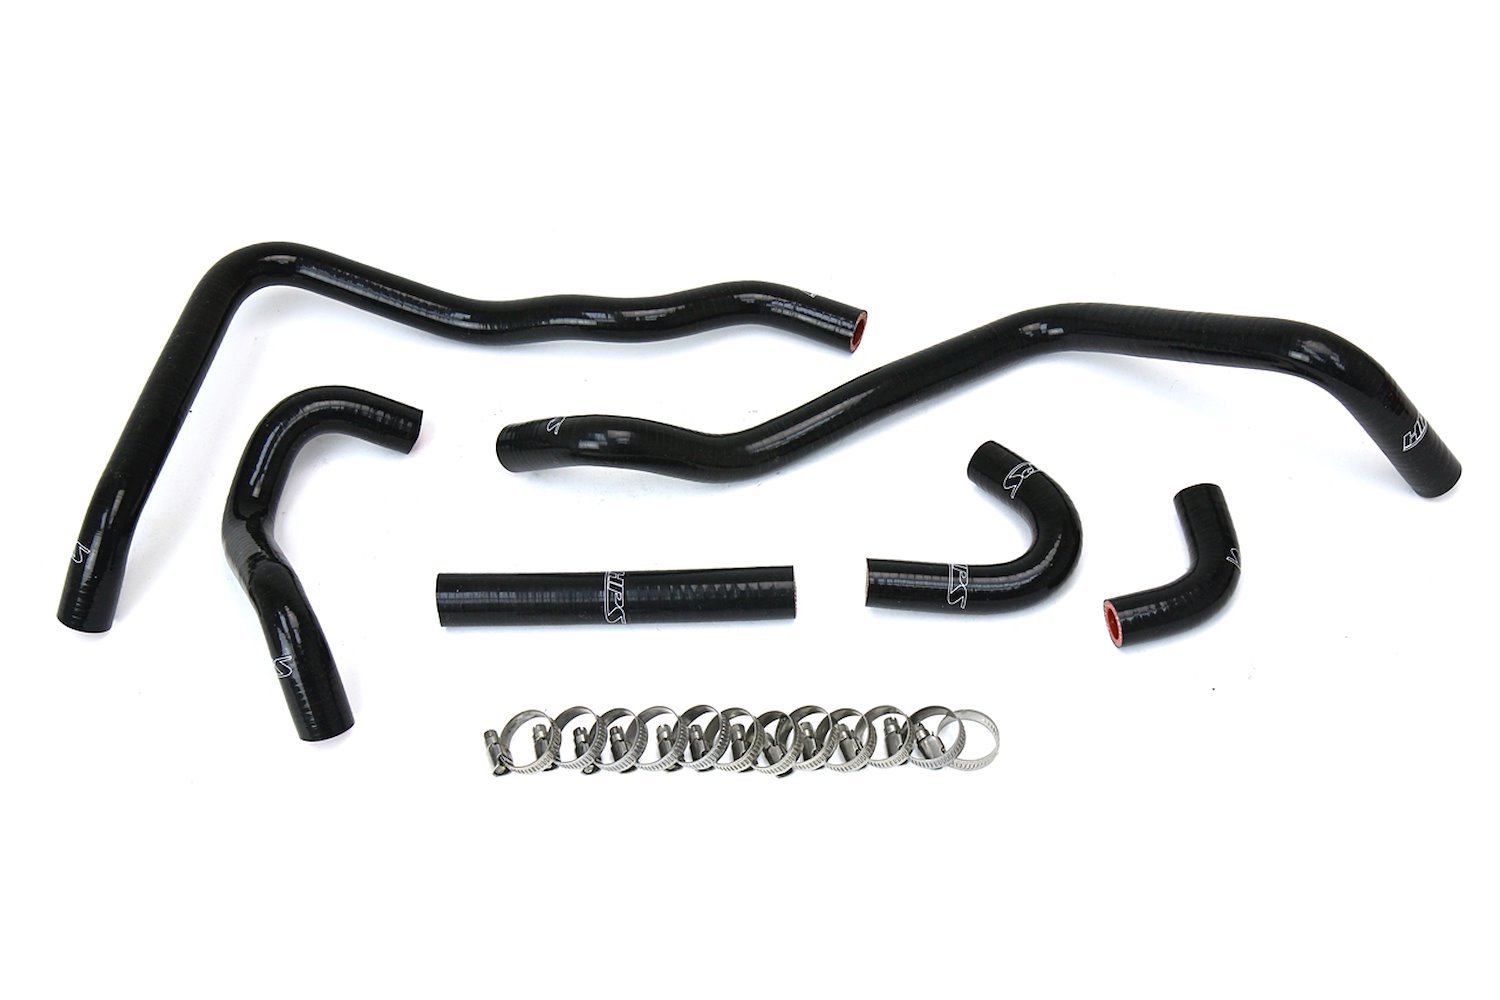 57-1433-BLK Heater Hose Kit, High-Temp 3-Ply Reinforced Silicone, Replace OEM Rubber Heater Coolant Hoses